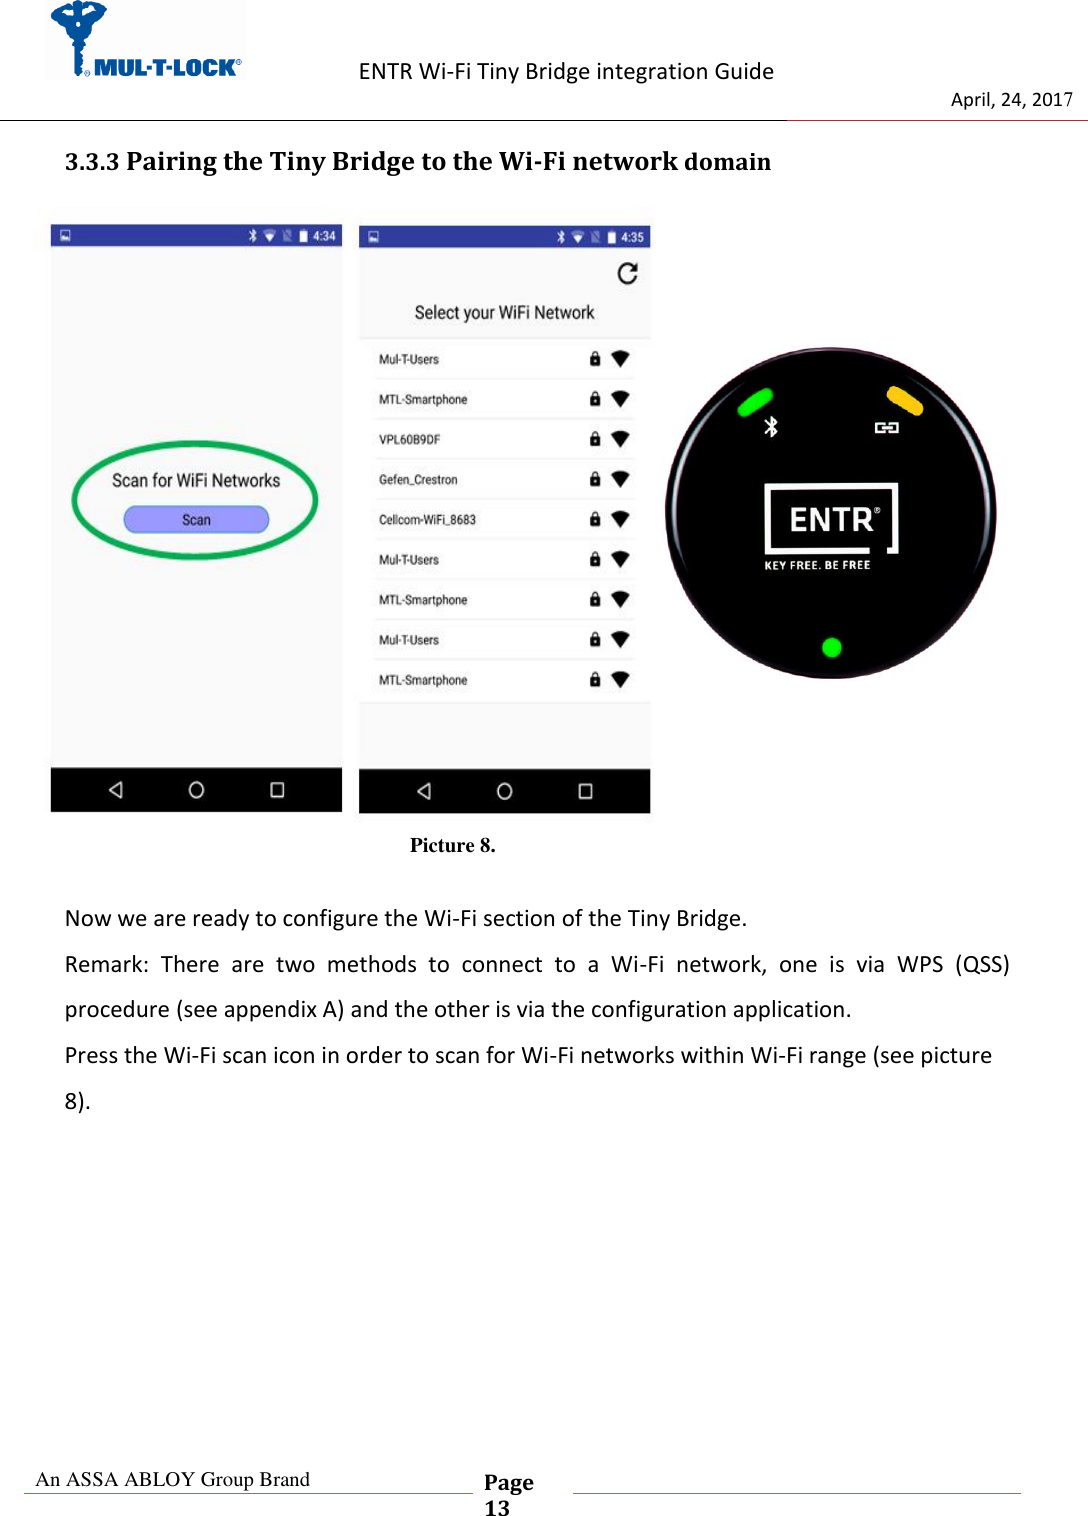                   ENTR Wi-Fi Tiny Bridge integration Guide     de                                 April, 24, 2017  An ASSA ABLOY Group Brand  Page 13    3.3.3 Pairing the Tiny Bridge to the Wi-Fi network domain  Picture 8.  Now we are ready to configure the Wi-Fi section of the Tiny Bridge. Remark:  There  are  two  methods  to  connect  to  a  Wi-Fi  network,  one  is  via  WPS  (QSS)     procedure (see appendix A) and the other is via the configuration application. Press the Wi-Fi scan icon in order to scan for Wi-Fi networks within Wi-Fi range (see picture 8).     